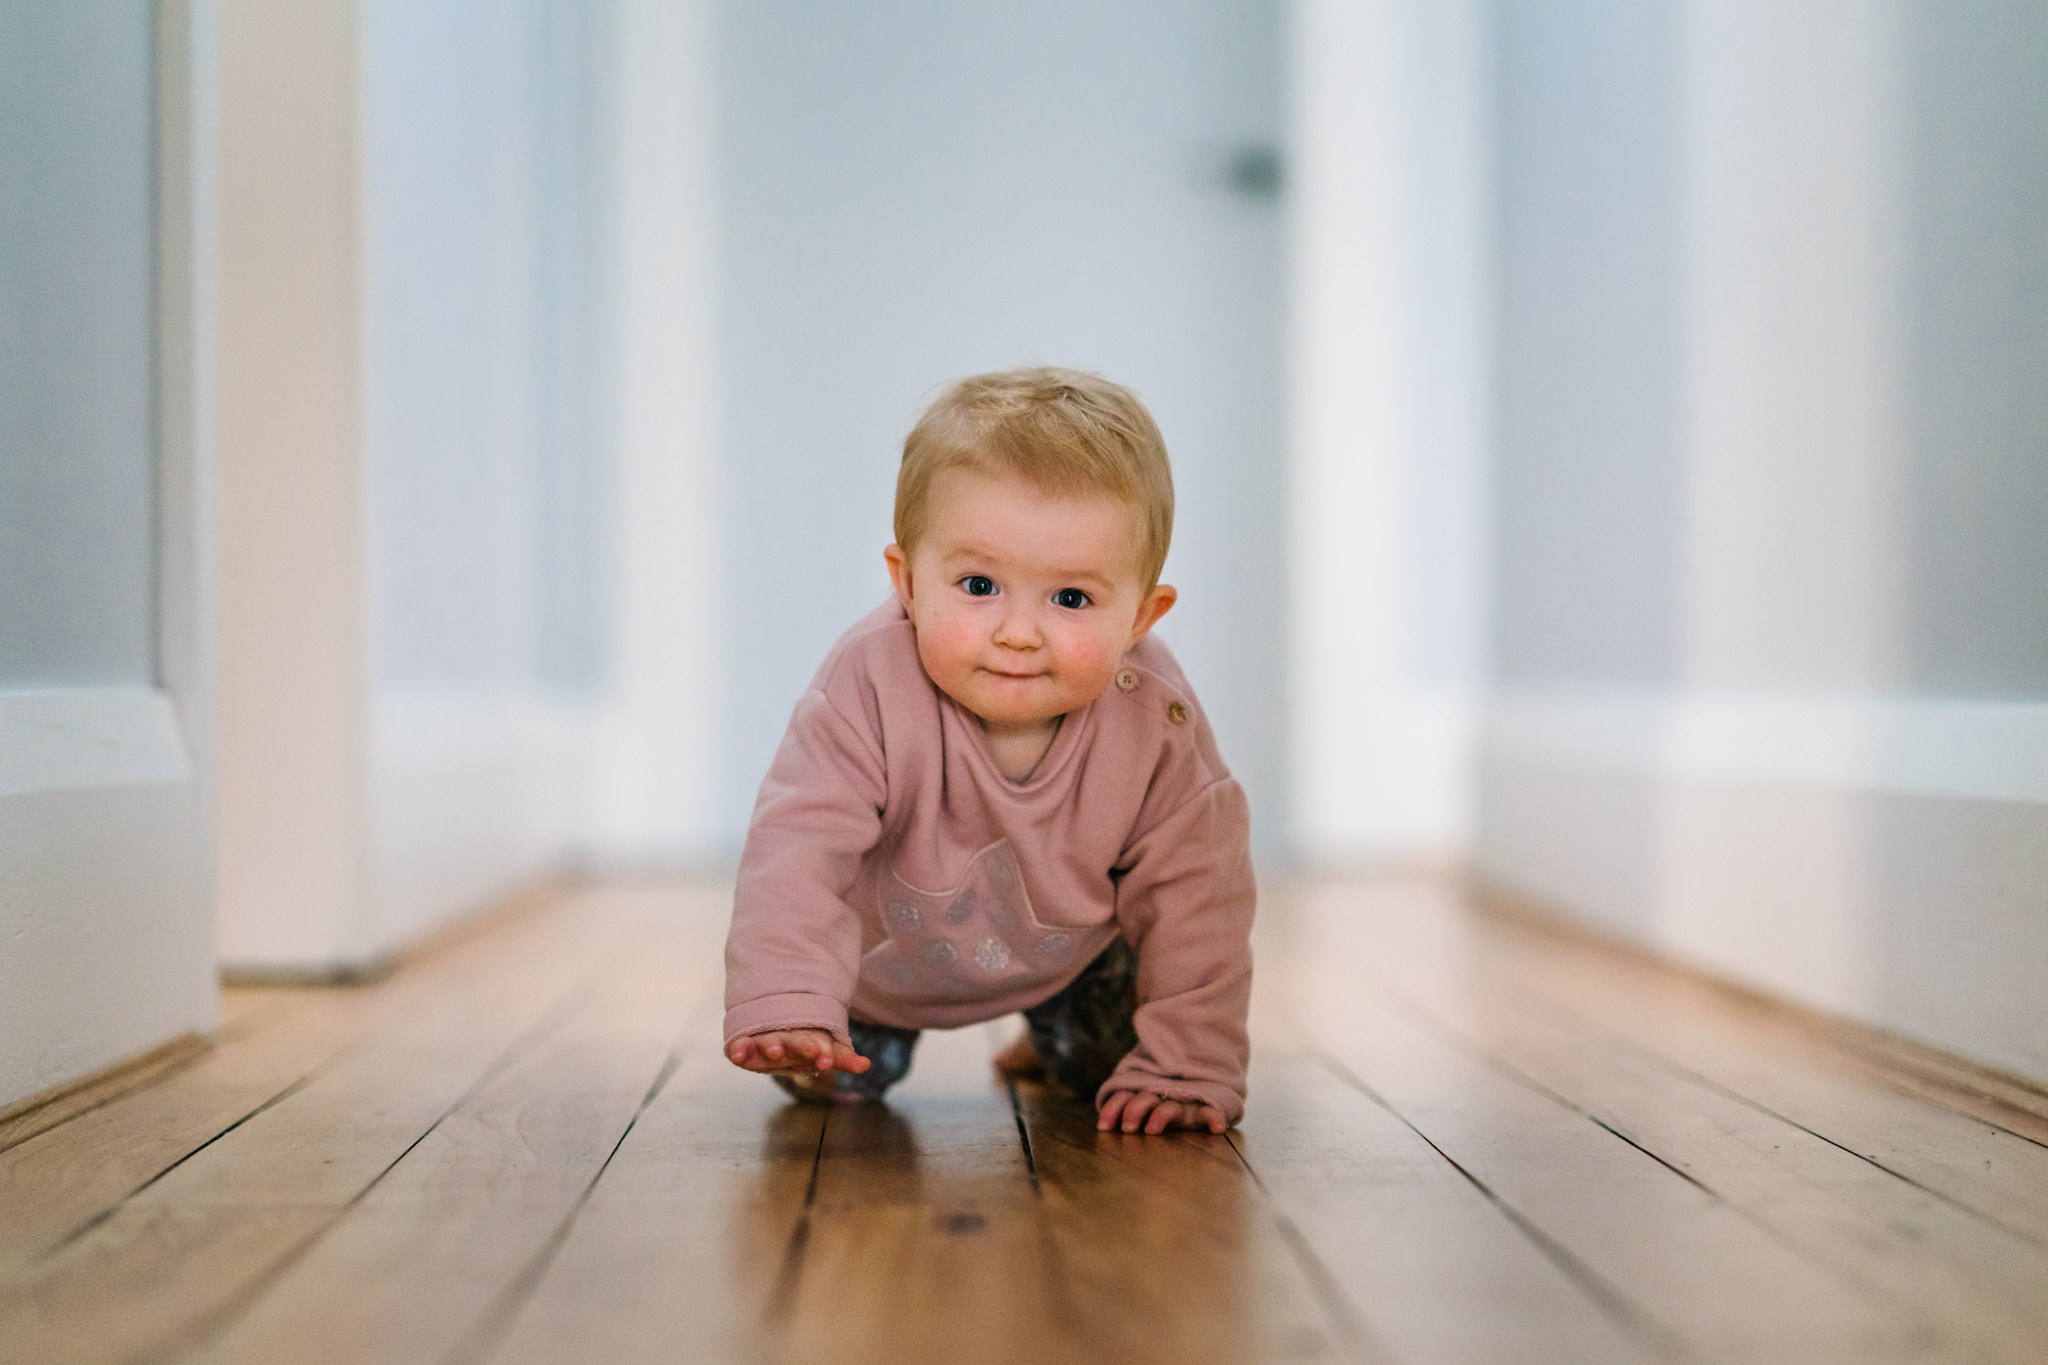 Baby crawling down hallway with cute look on her face